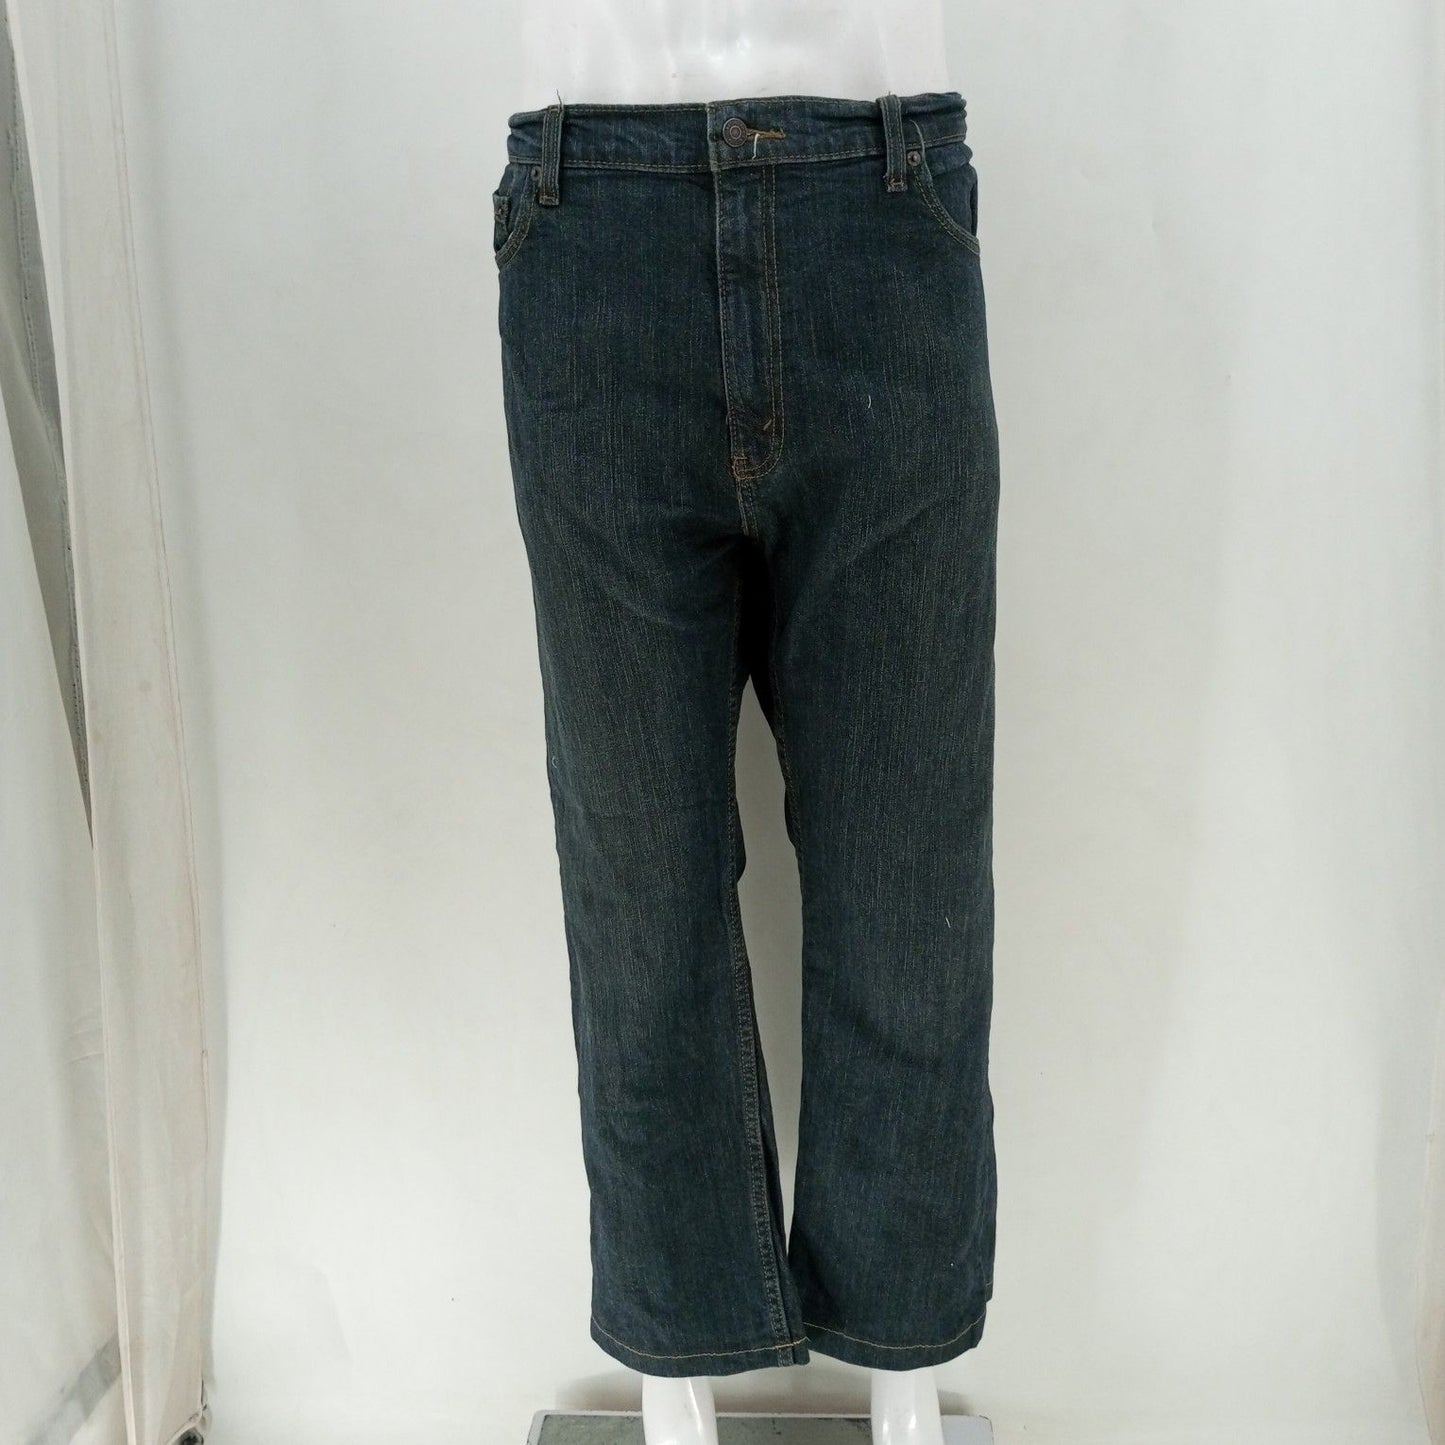 Levis DISTRESSED Jeans 30 Count Box